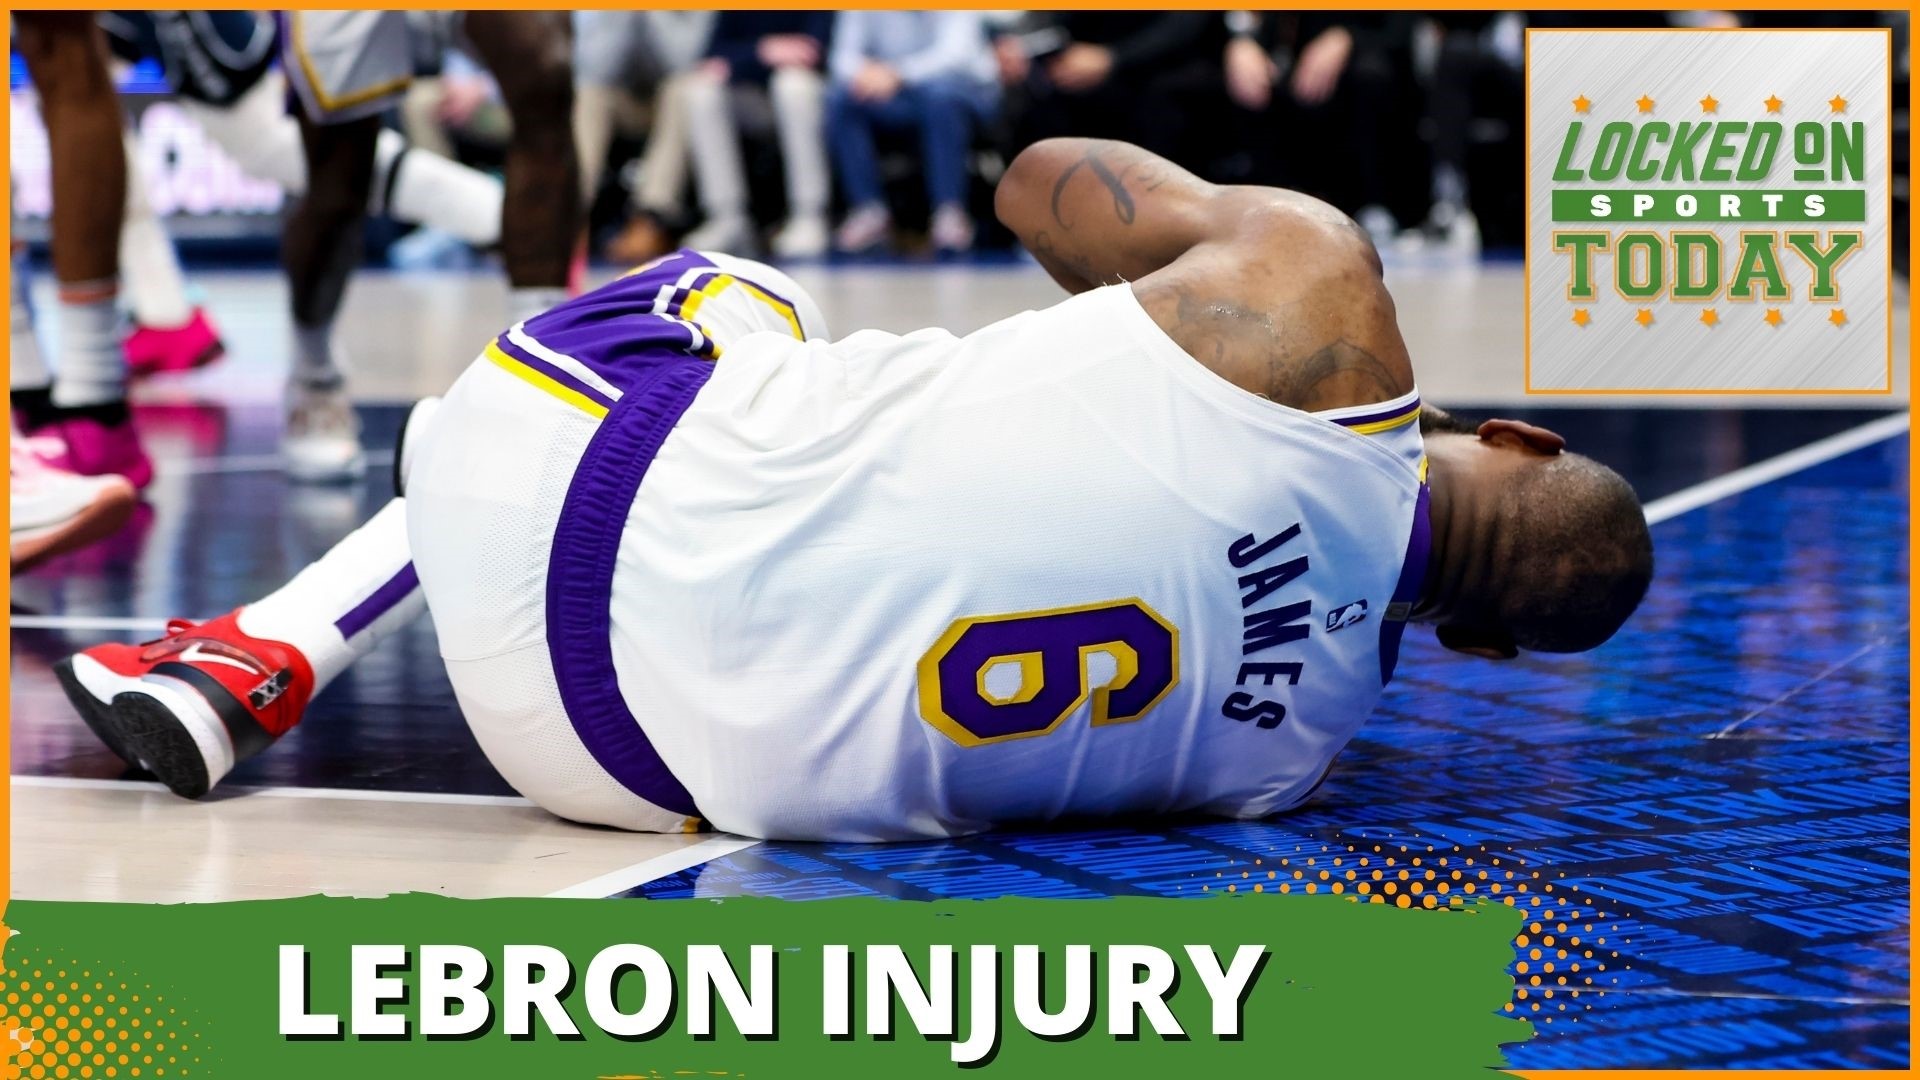 Discussing the day's top sports stories from Lebron James injury and the impact on the Lakers' season to the new MLB pitch clock already controversial.